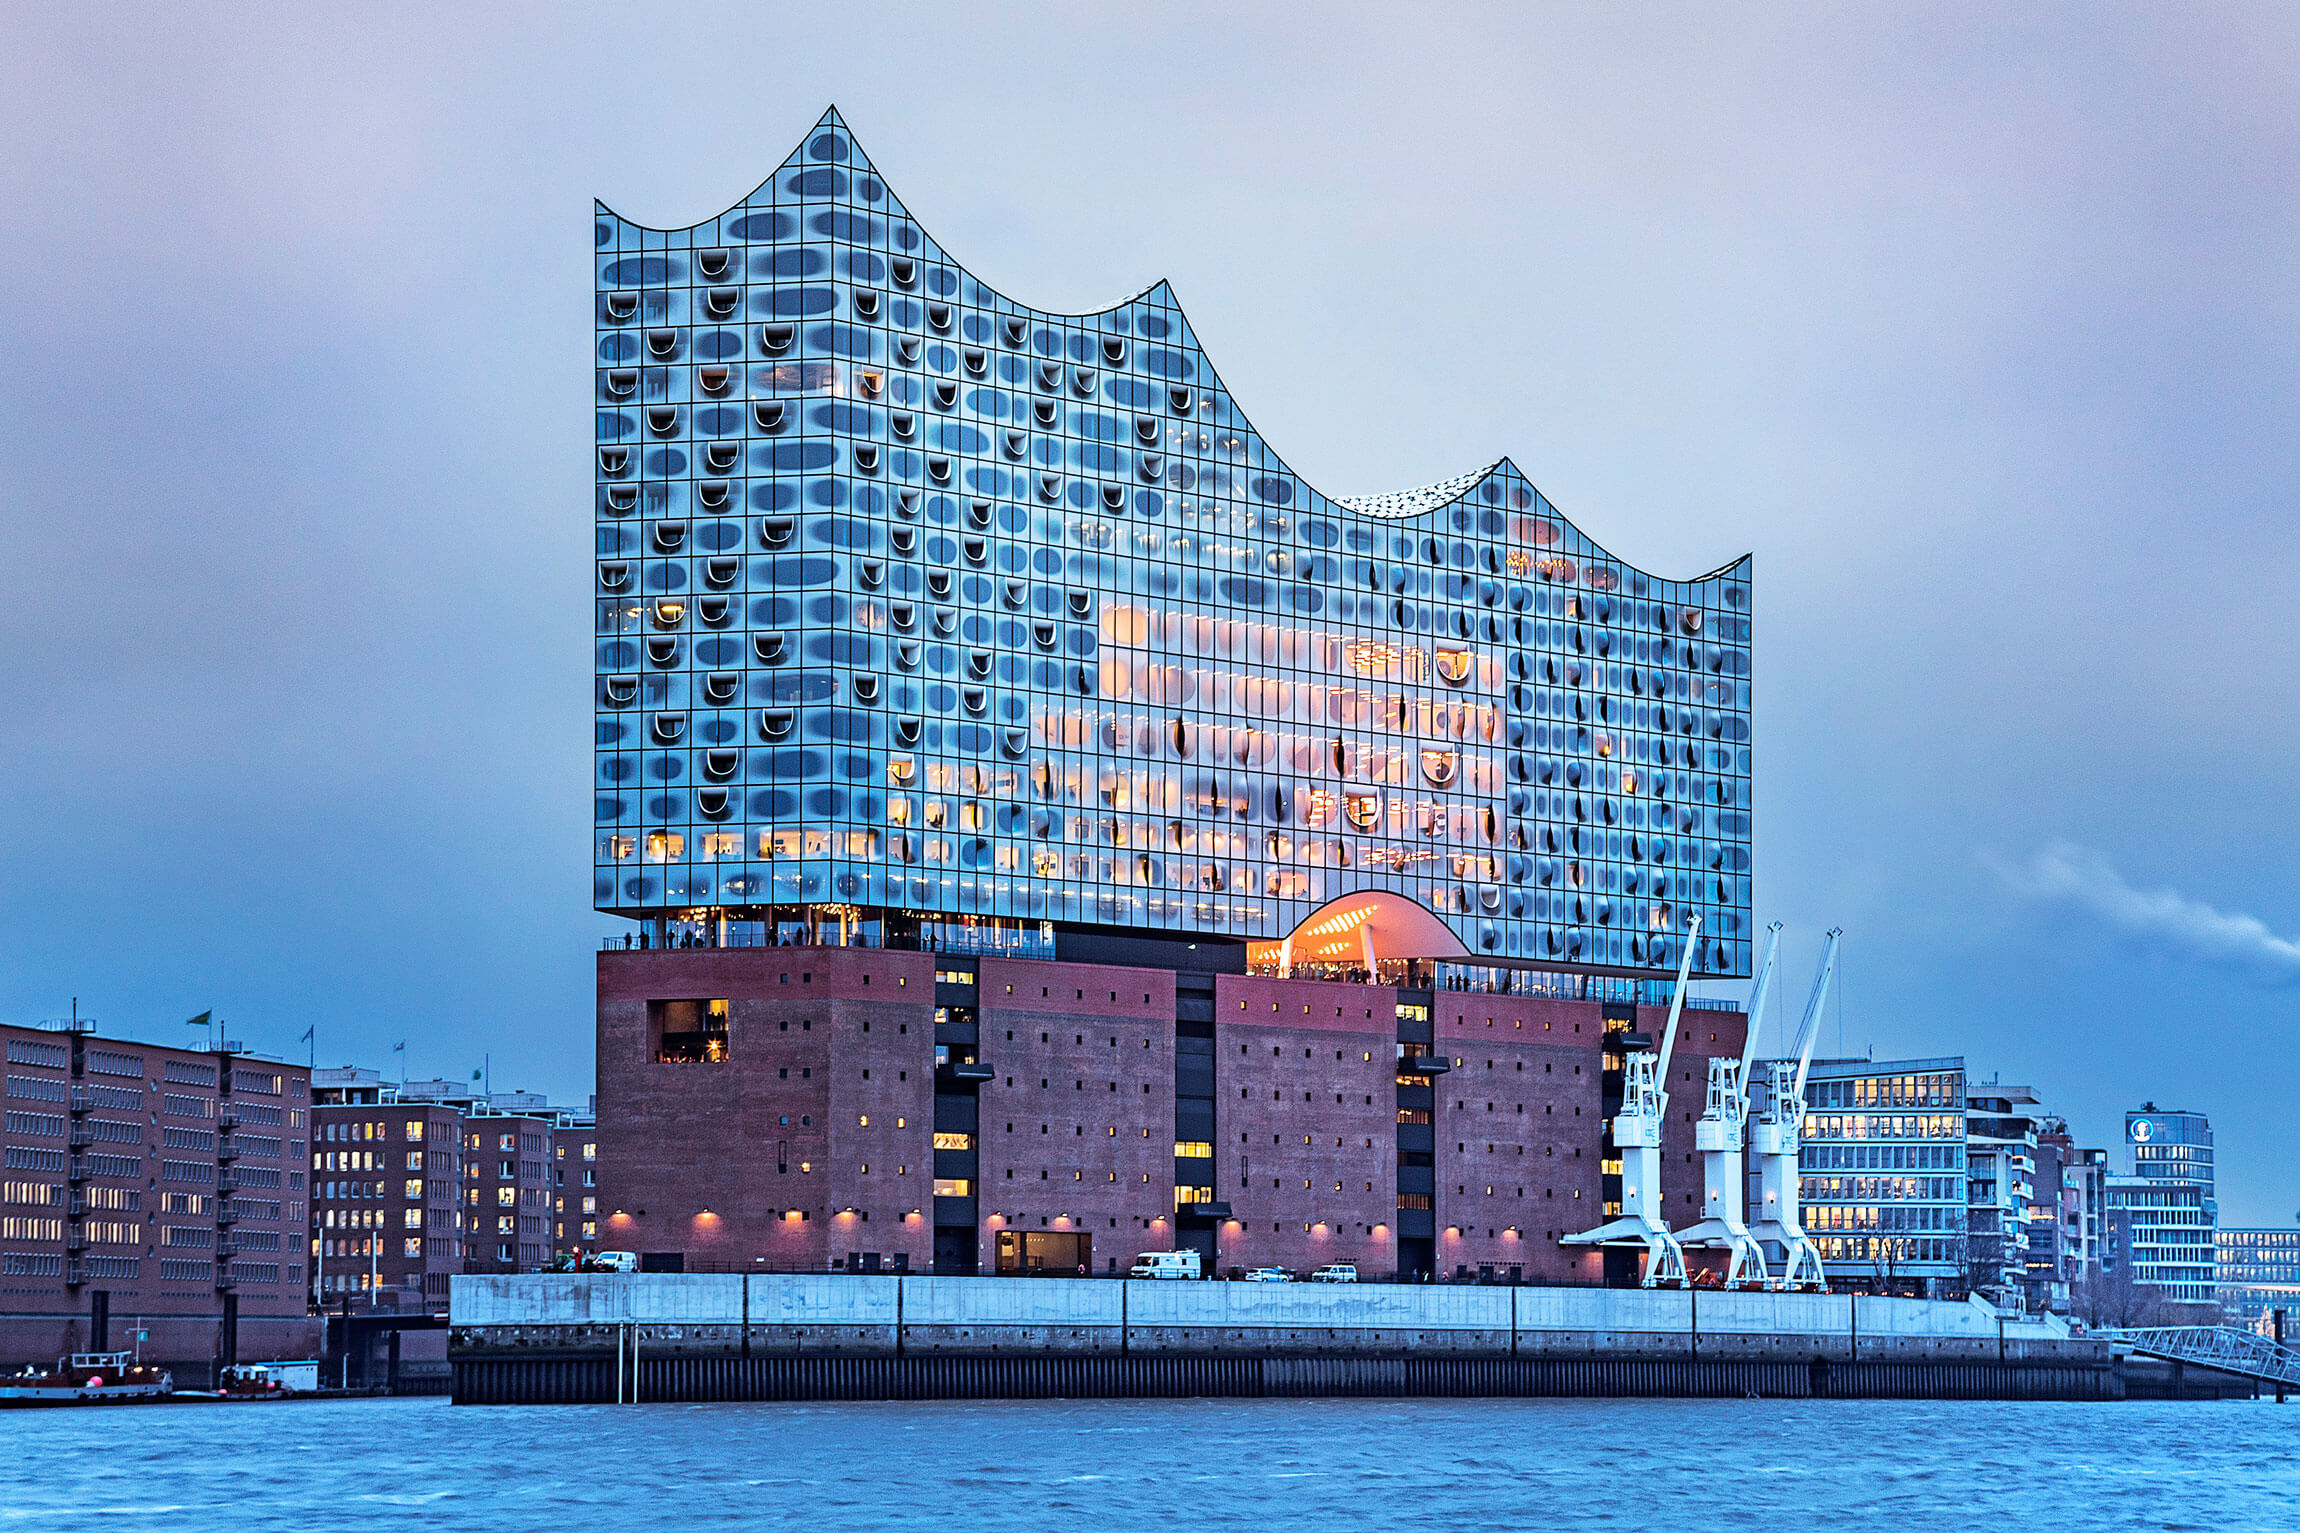 Hosts Global | Discover Elbphilharmonie in Germany